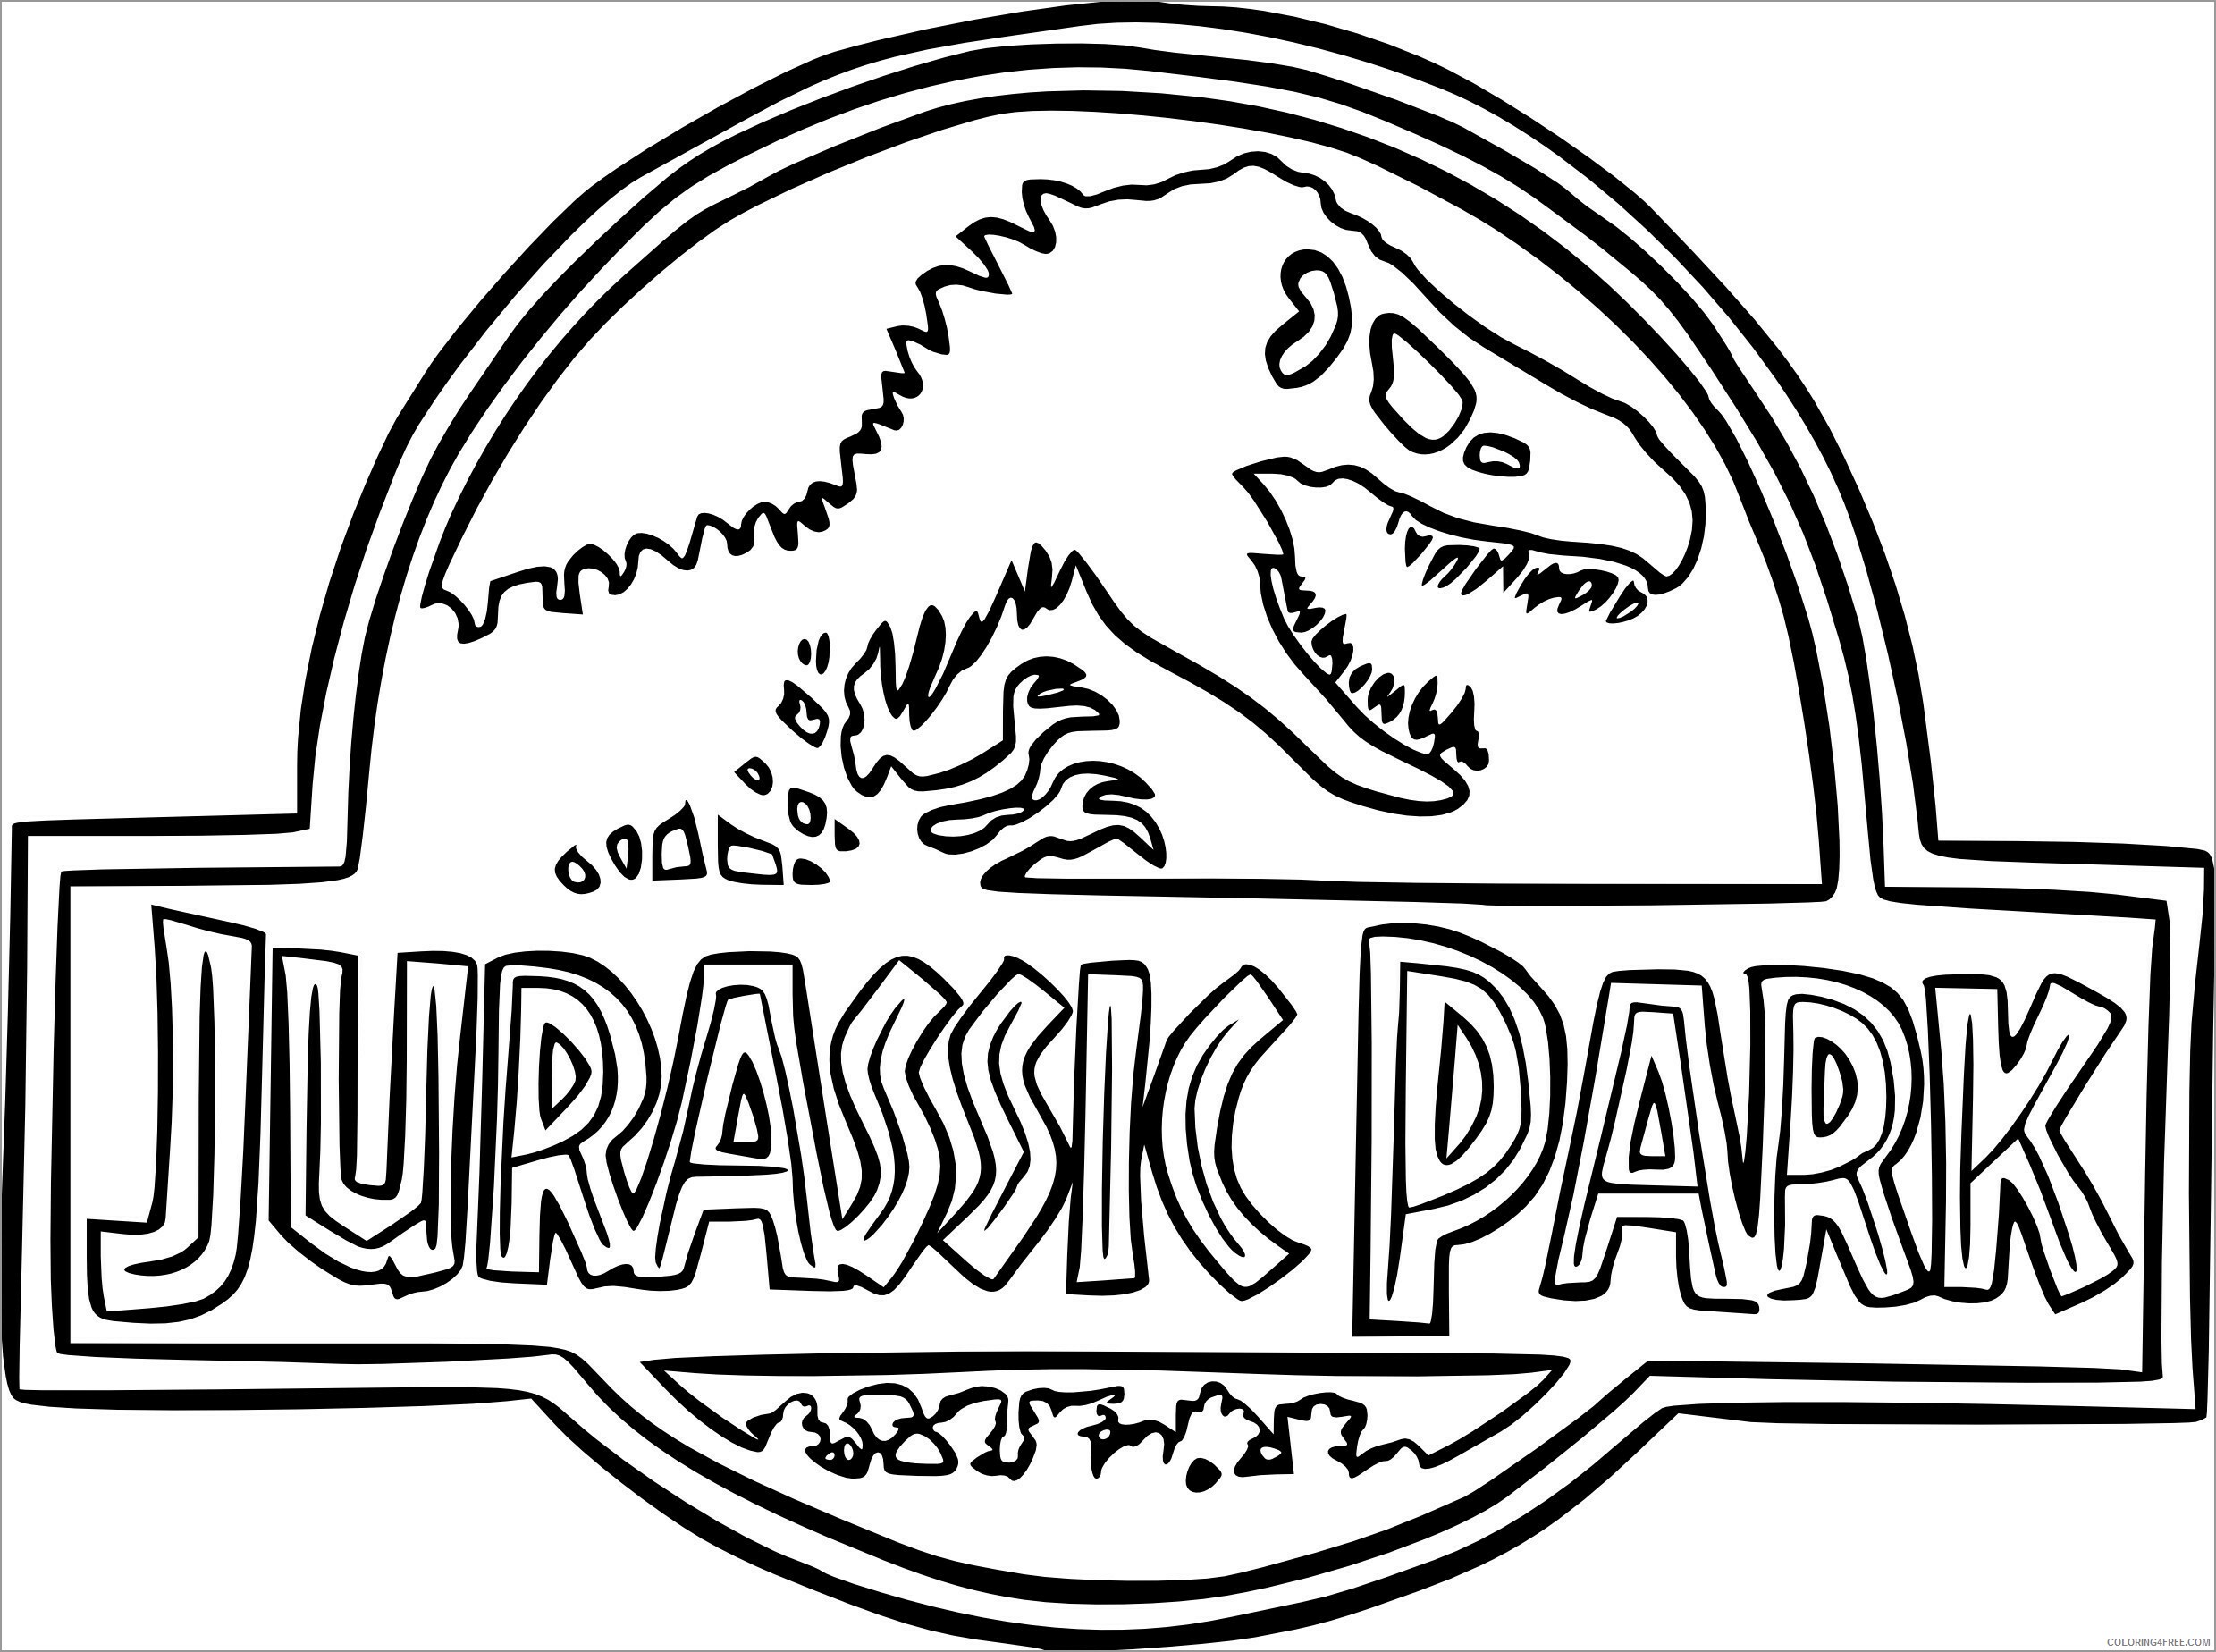 jurassic-world-coloring-pages-for-boys-jurassic-park-logo-printable